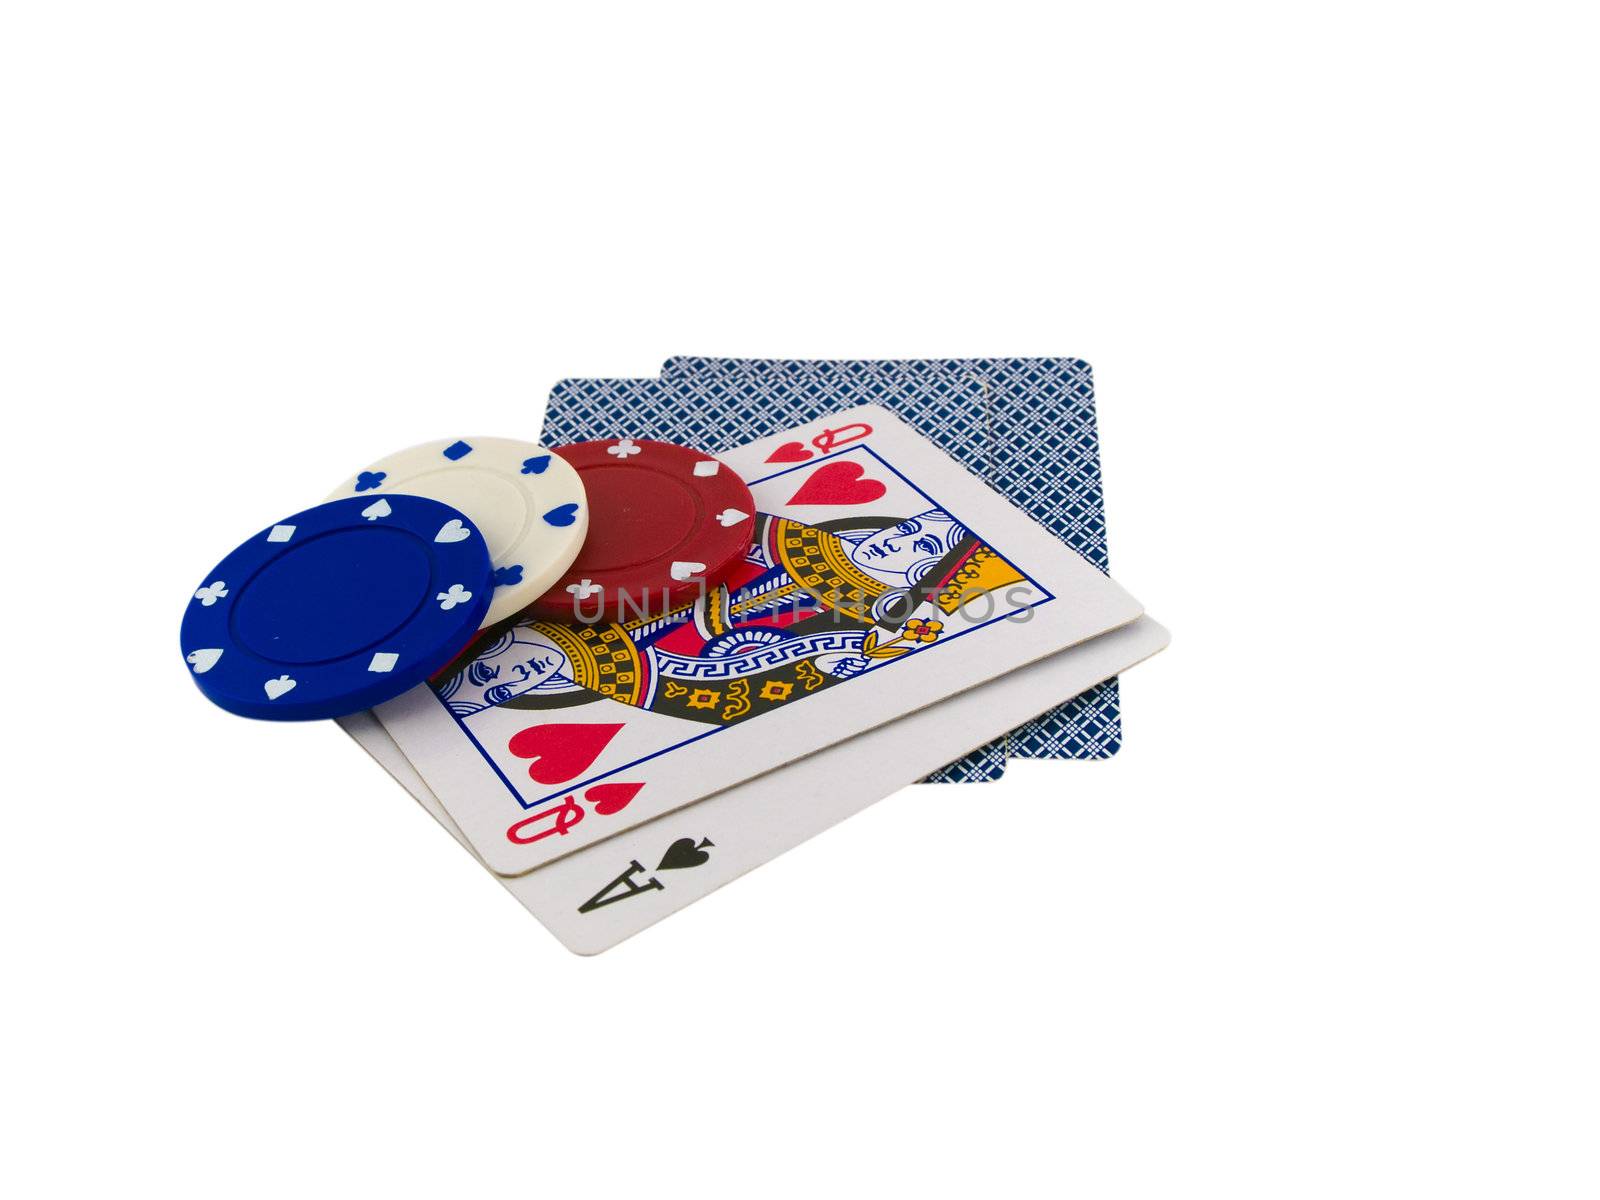 Playing Cards Queen and Ace with Poker Chips on White Background by bobbigmac